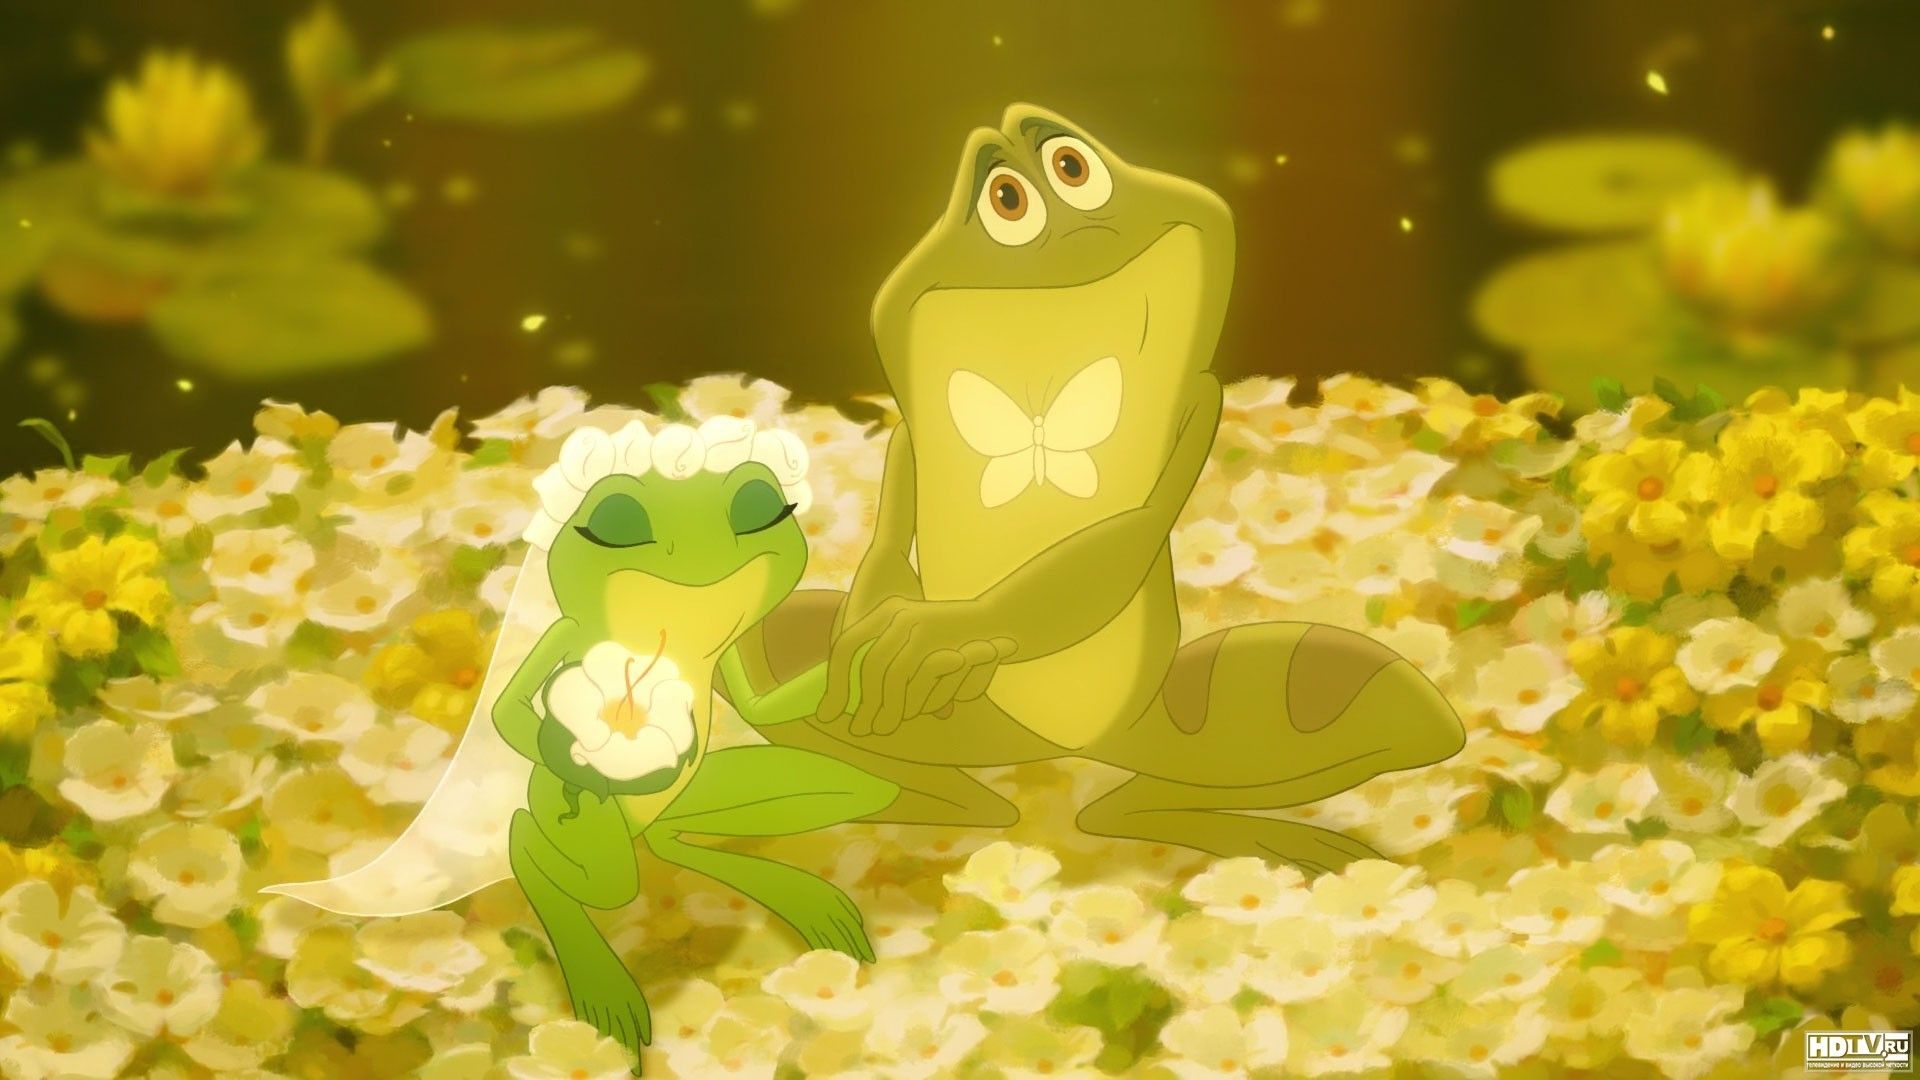 6 The Princess And The Frog HD Wallpapers | Backgrounds ...